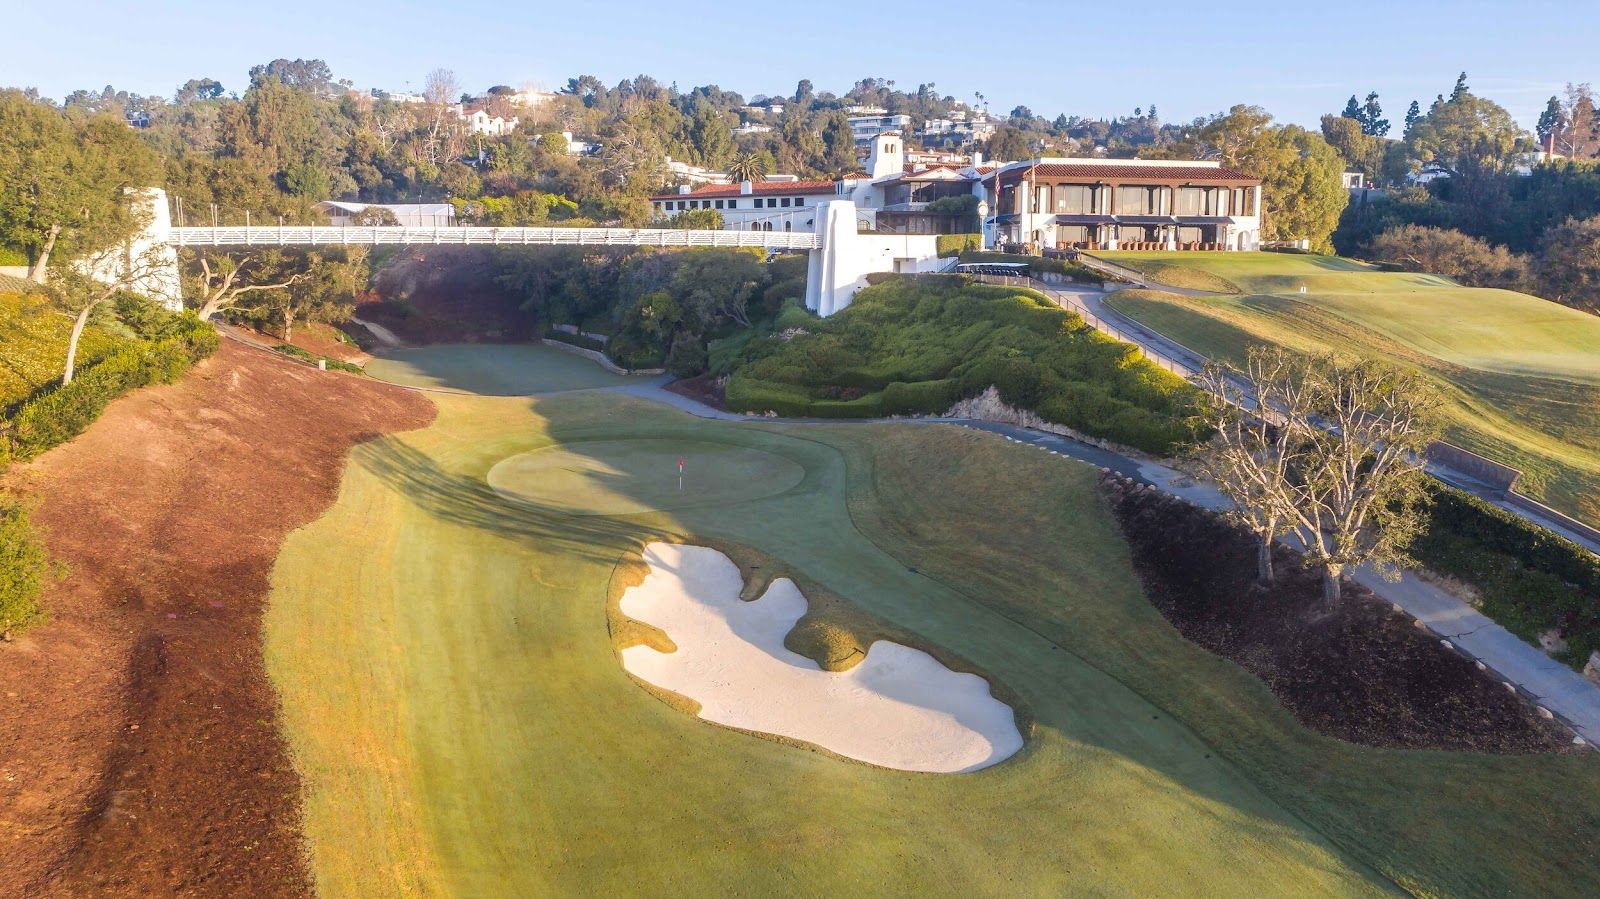 Bel-Air Country Club - California - Best In State Golf Course | Top 100 Golf Courses